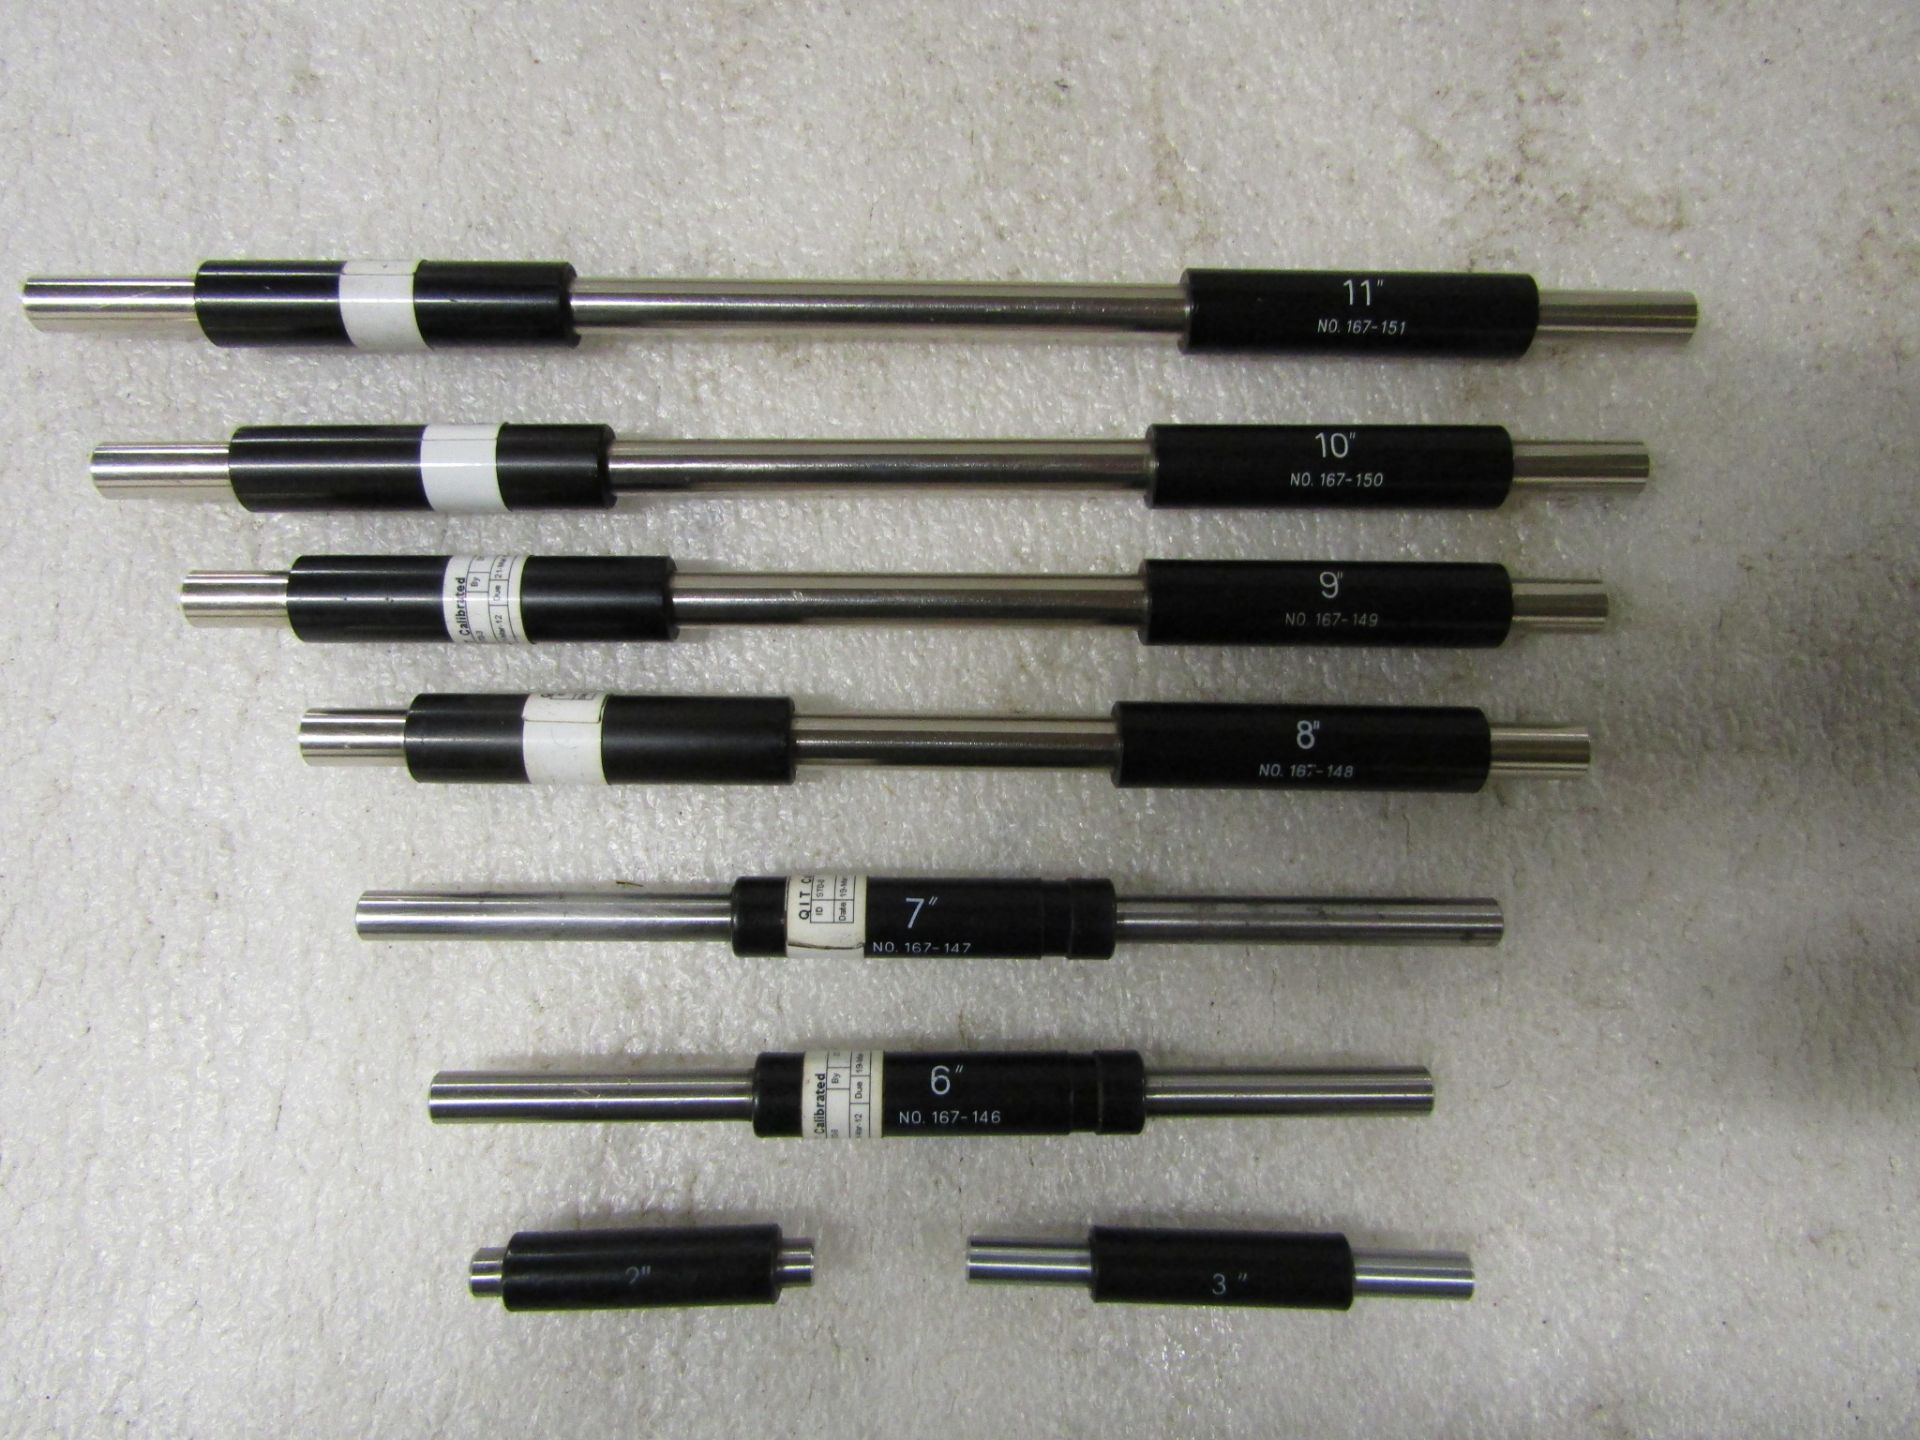 Mitutoyo Standard Calibration Rods 8 piece set from 2" to 11" in case